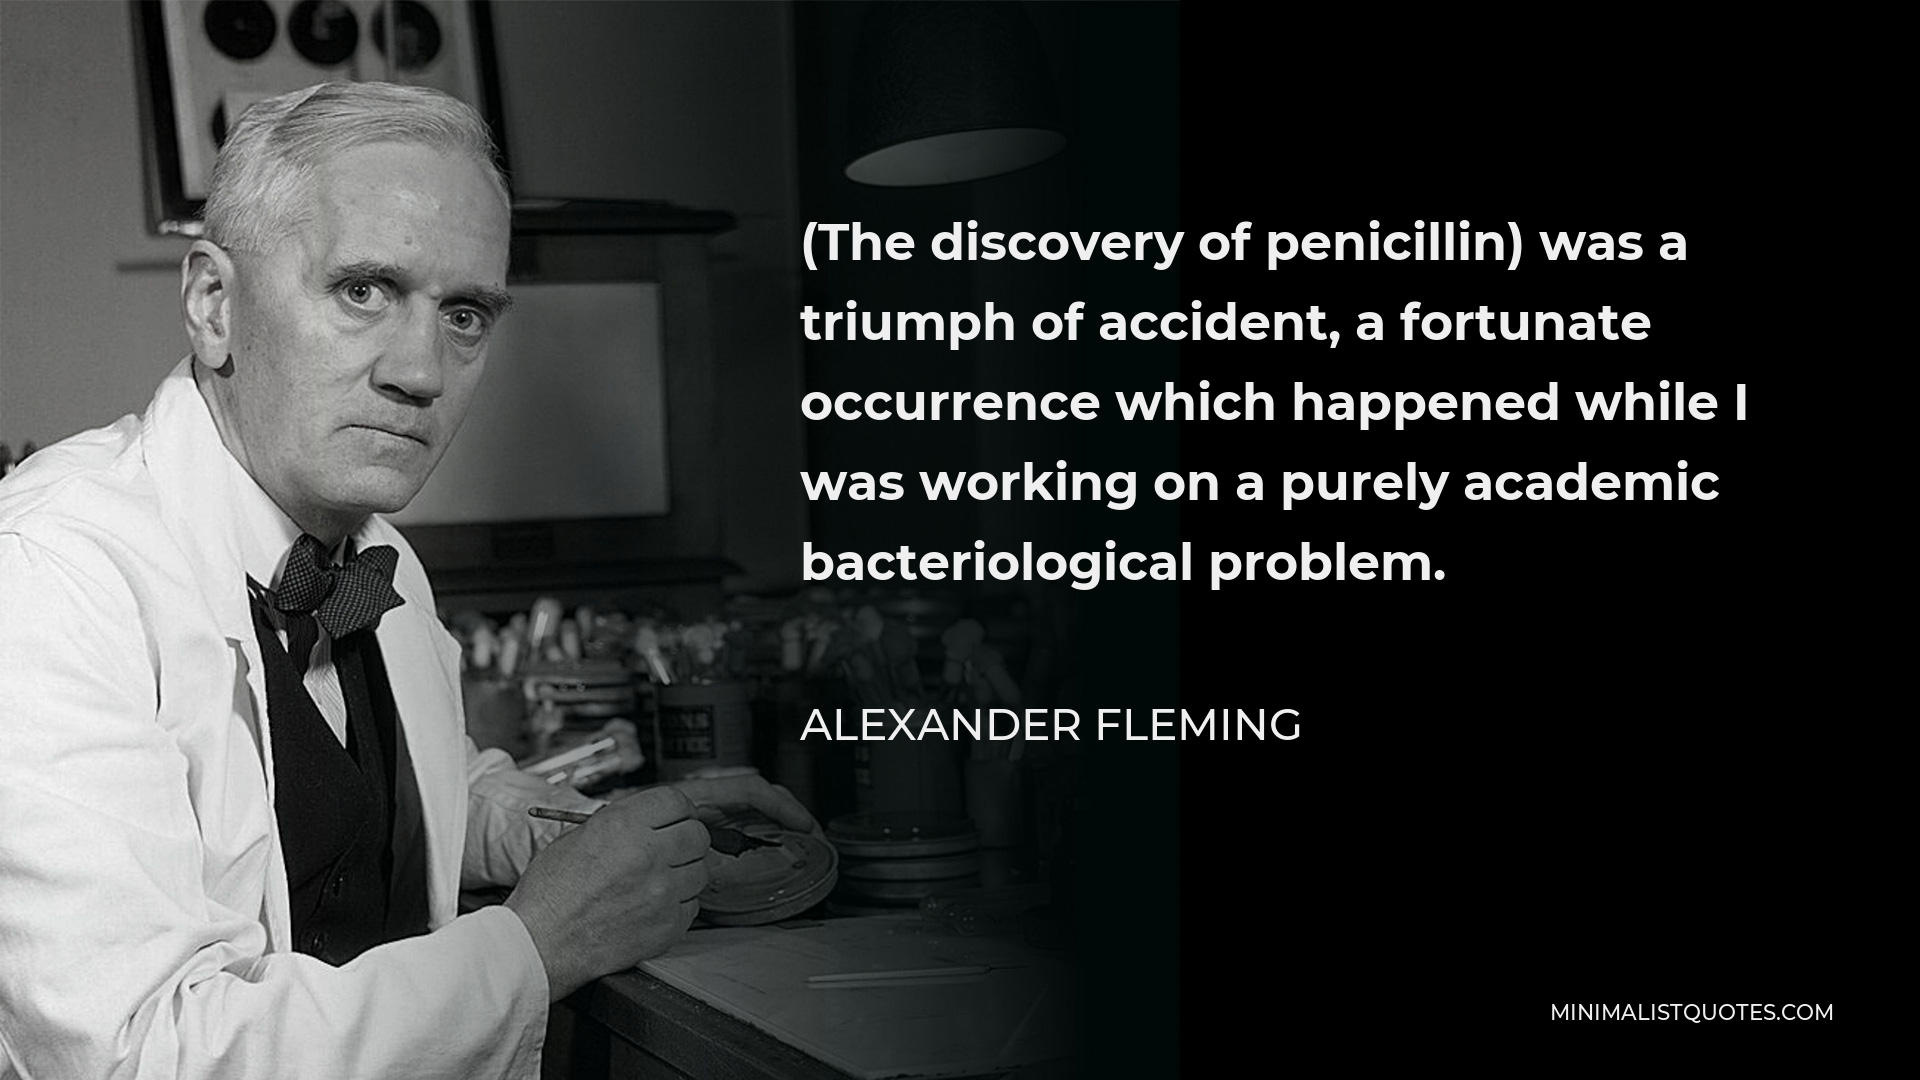 Alexander Fleming Quote - (The discovery of penicillin) was a triumph of accident, a fortunate occurrence which happened while I was working on a purely academic bacteriological problem.